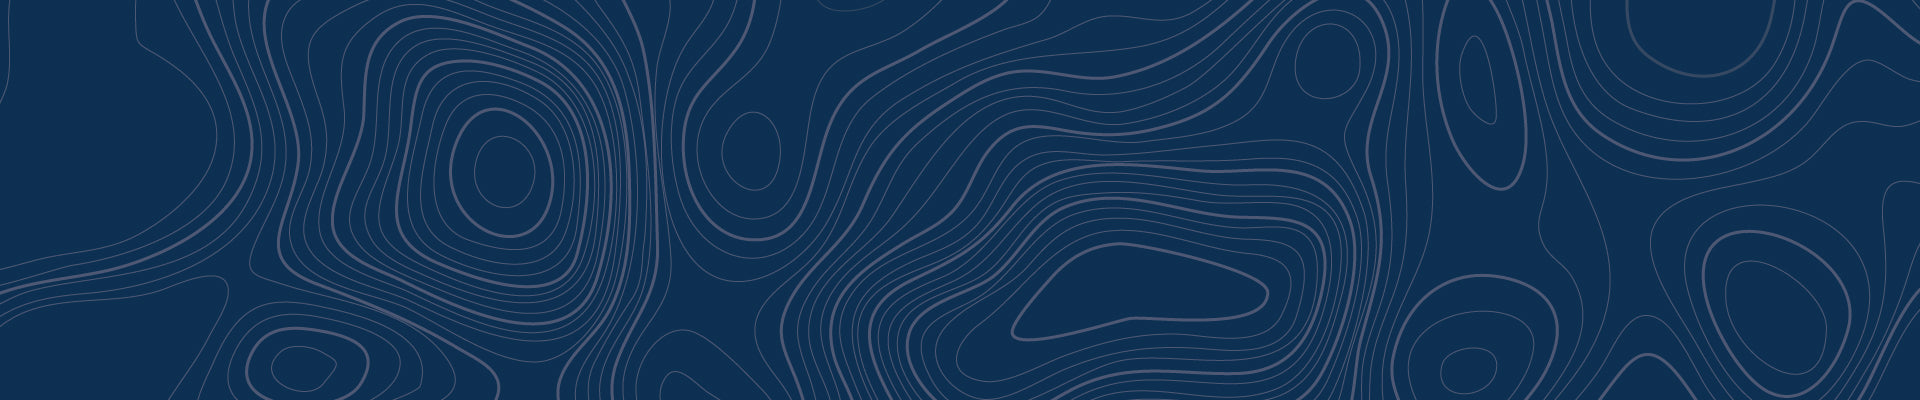 A dark blue background with wavy lines.